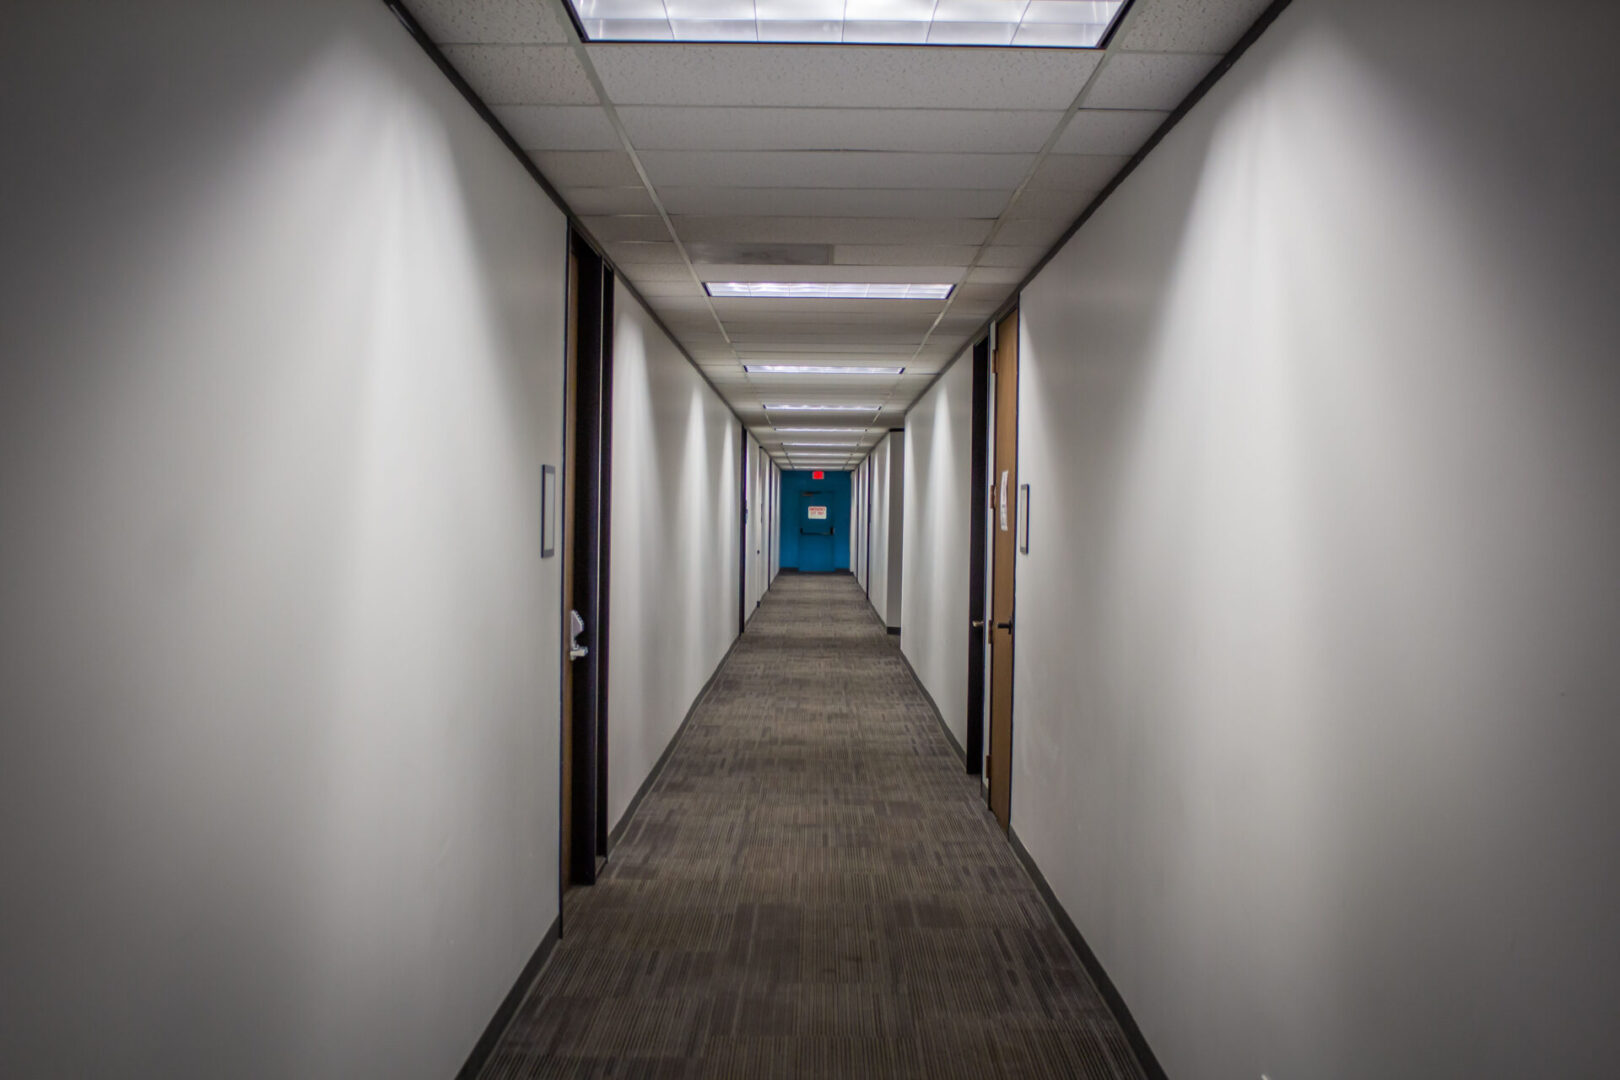 An empty hallway with a blue door at the end